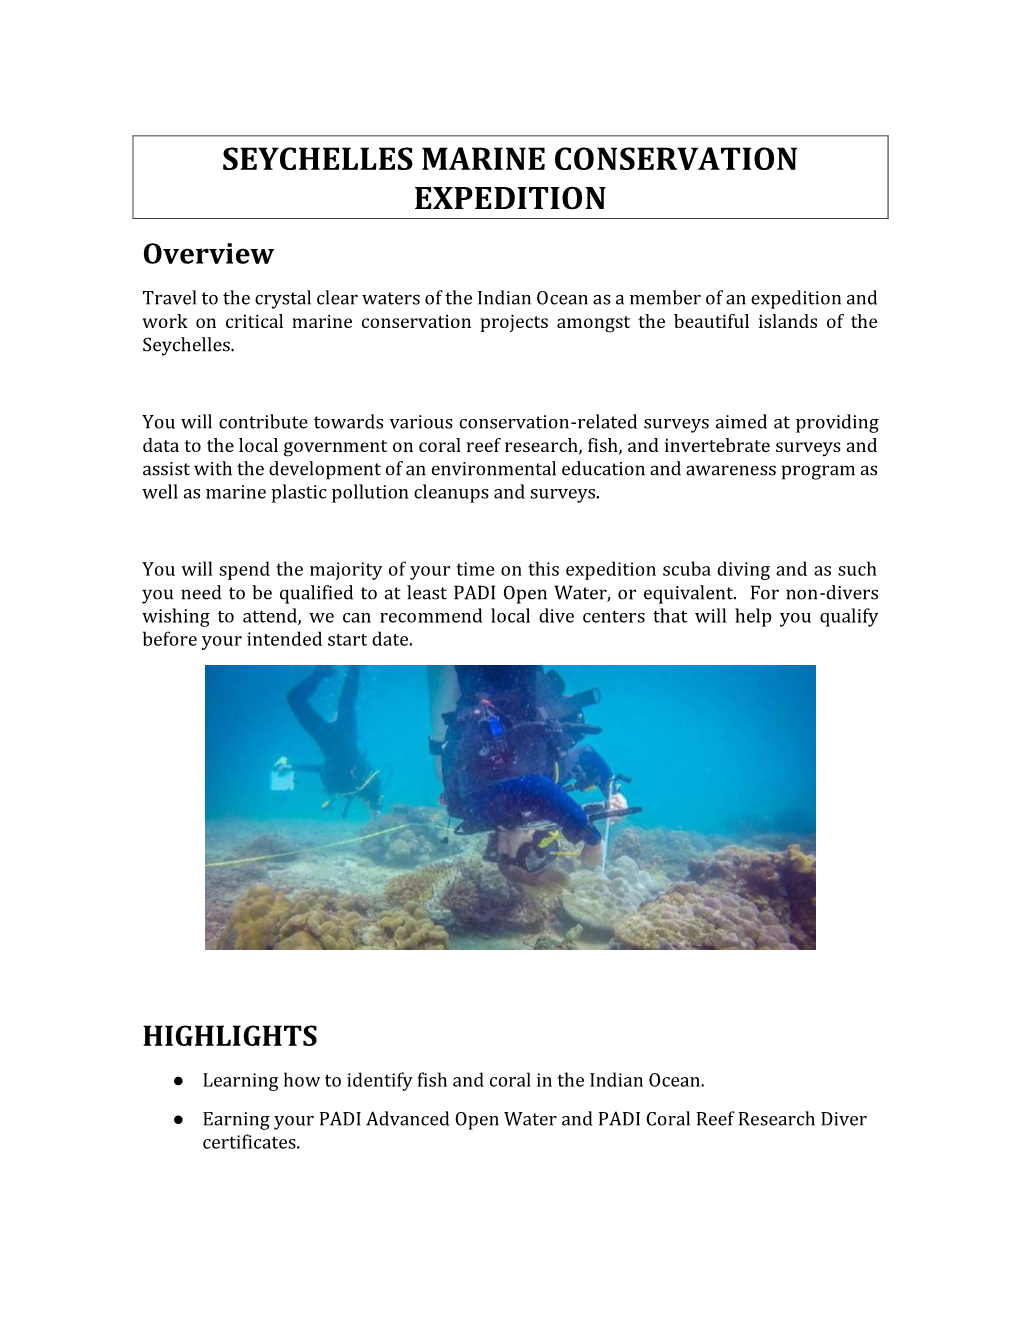 Seychelles Marine Conservation Expedition